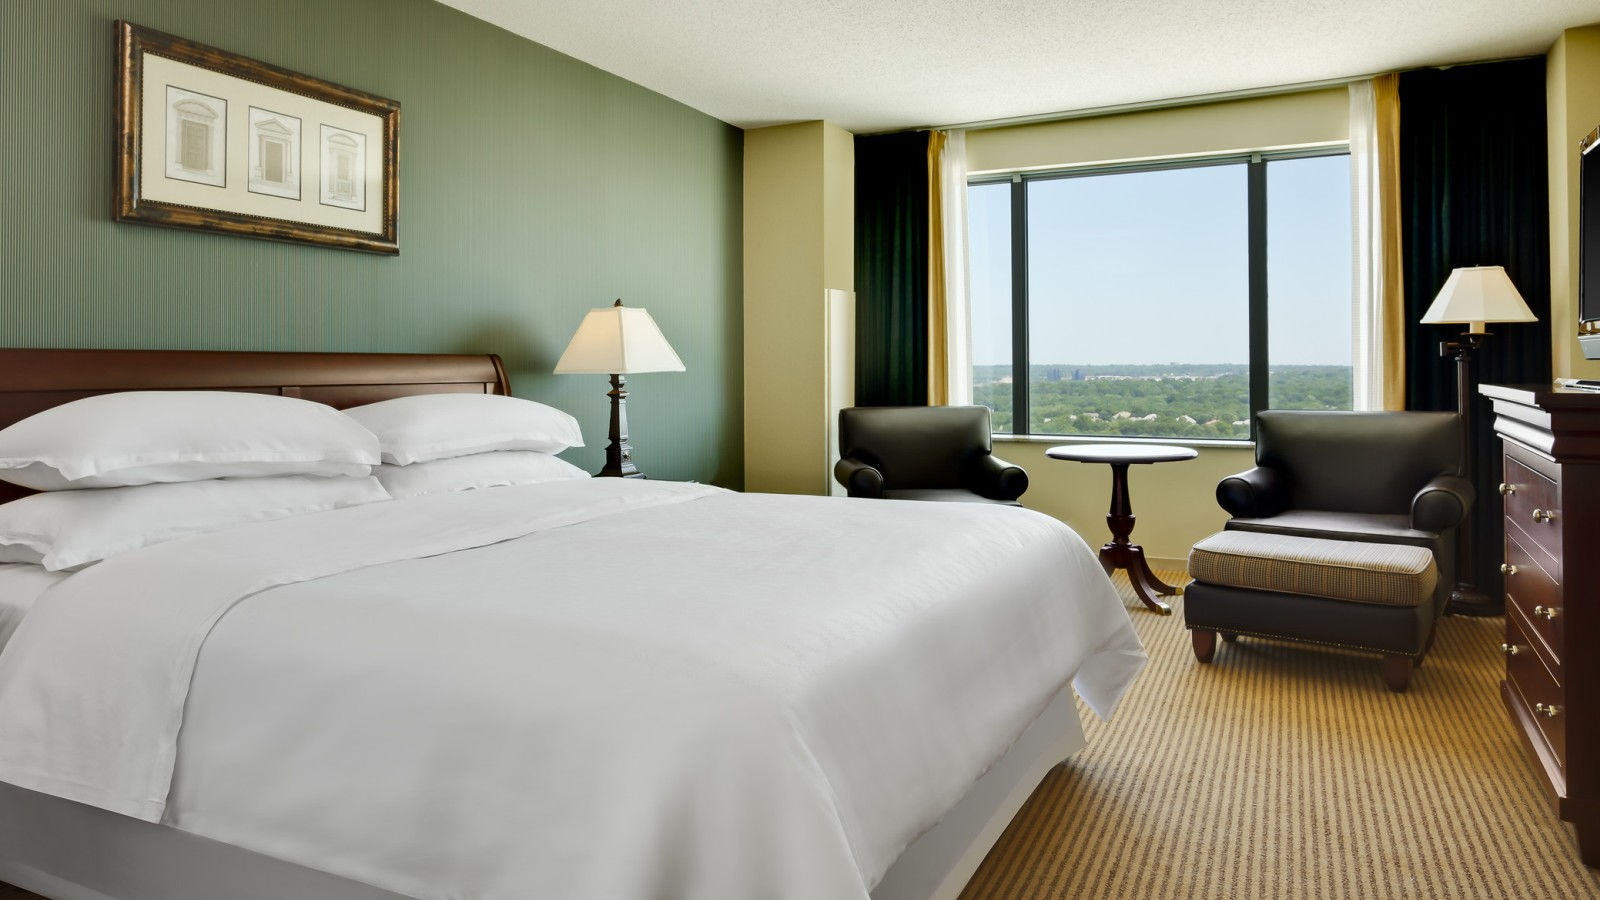 An accommodation outside of our center for Venues for Conferences Conventions and Business Events Kansas City